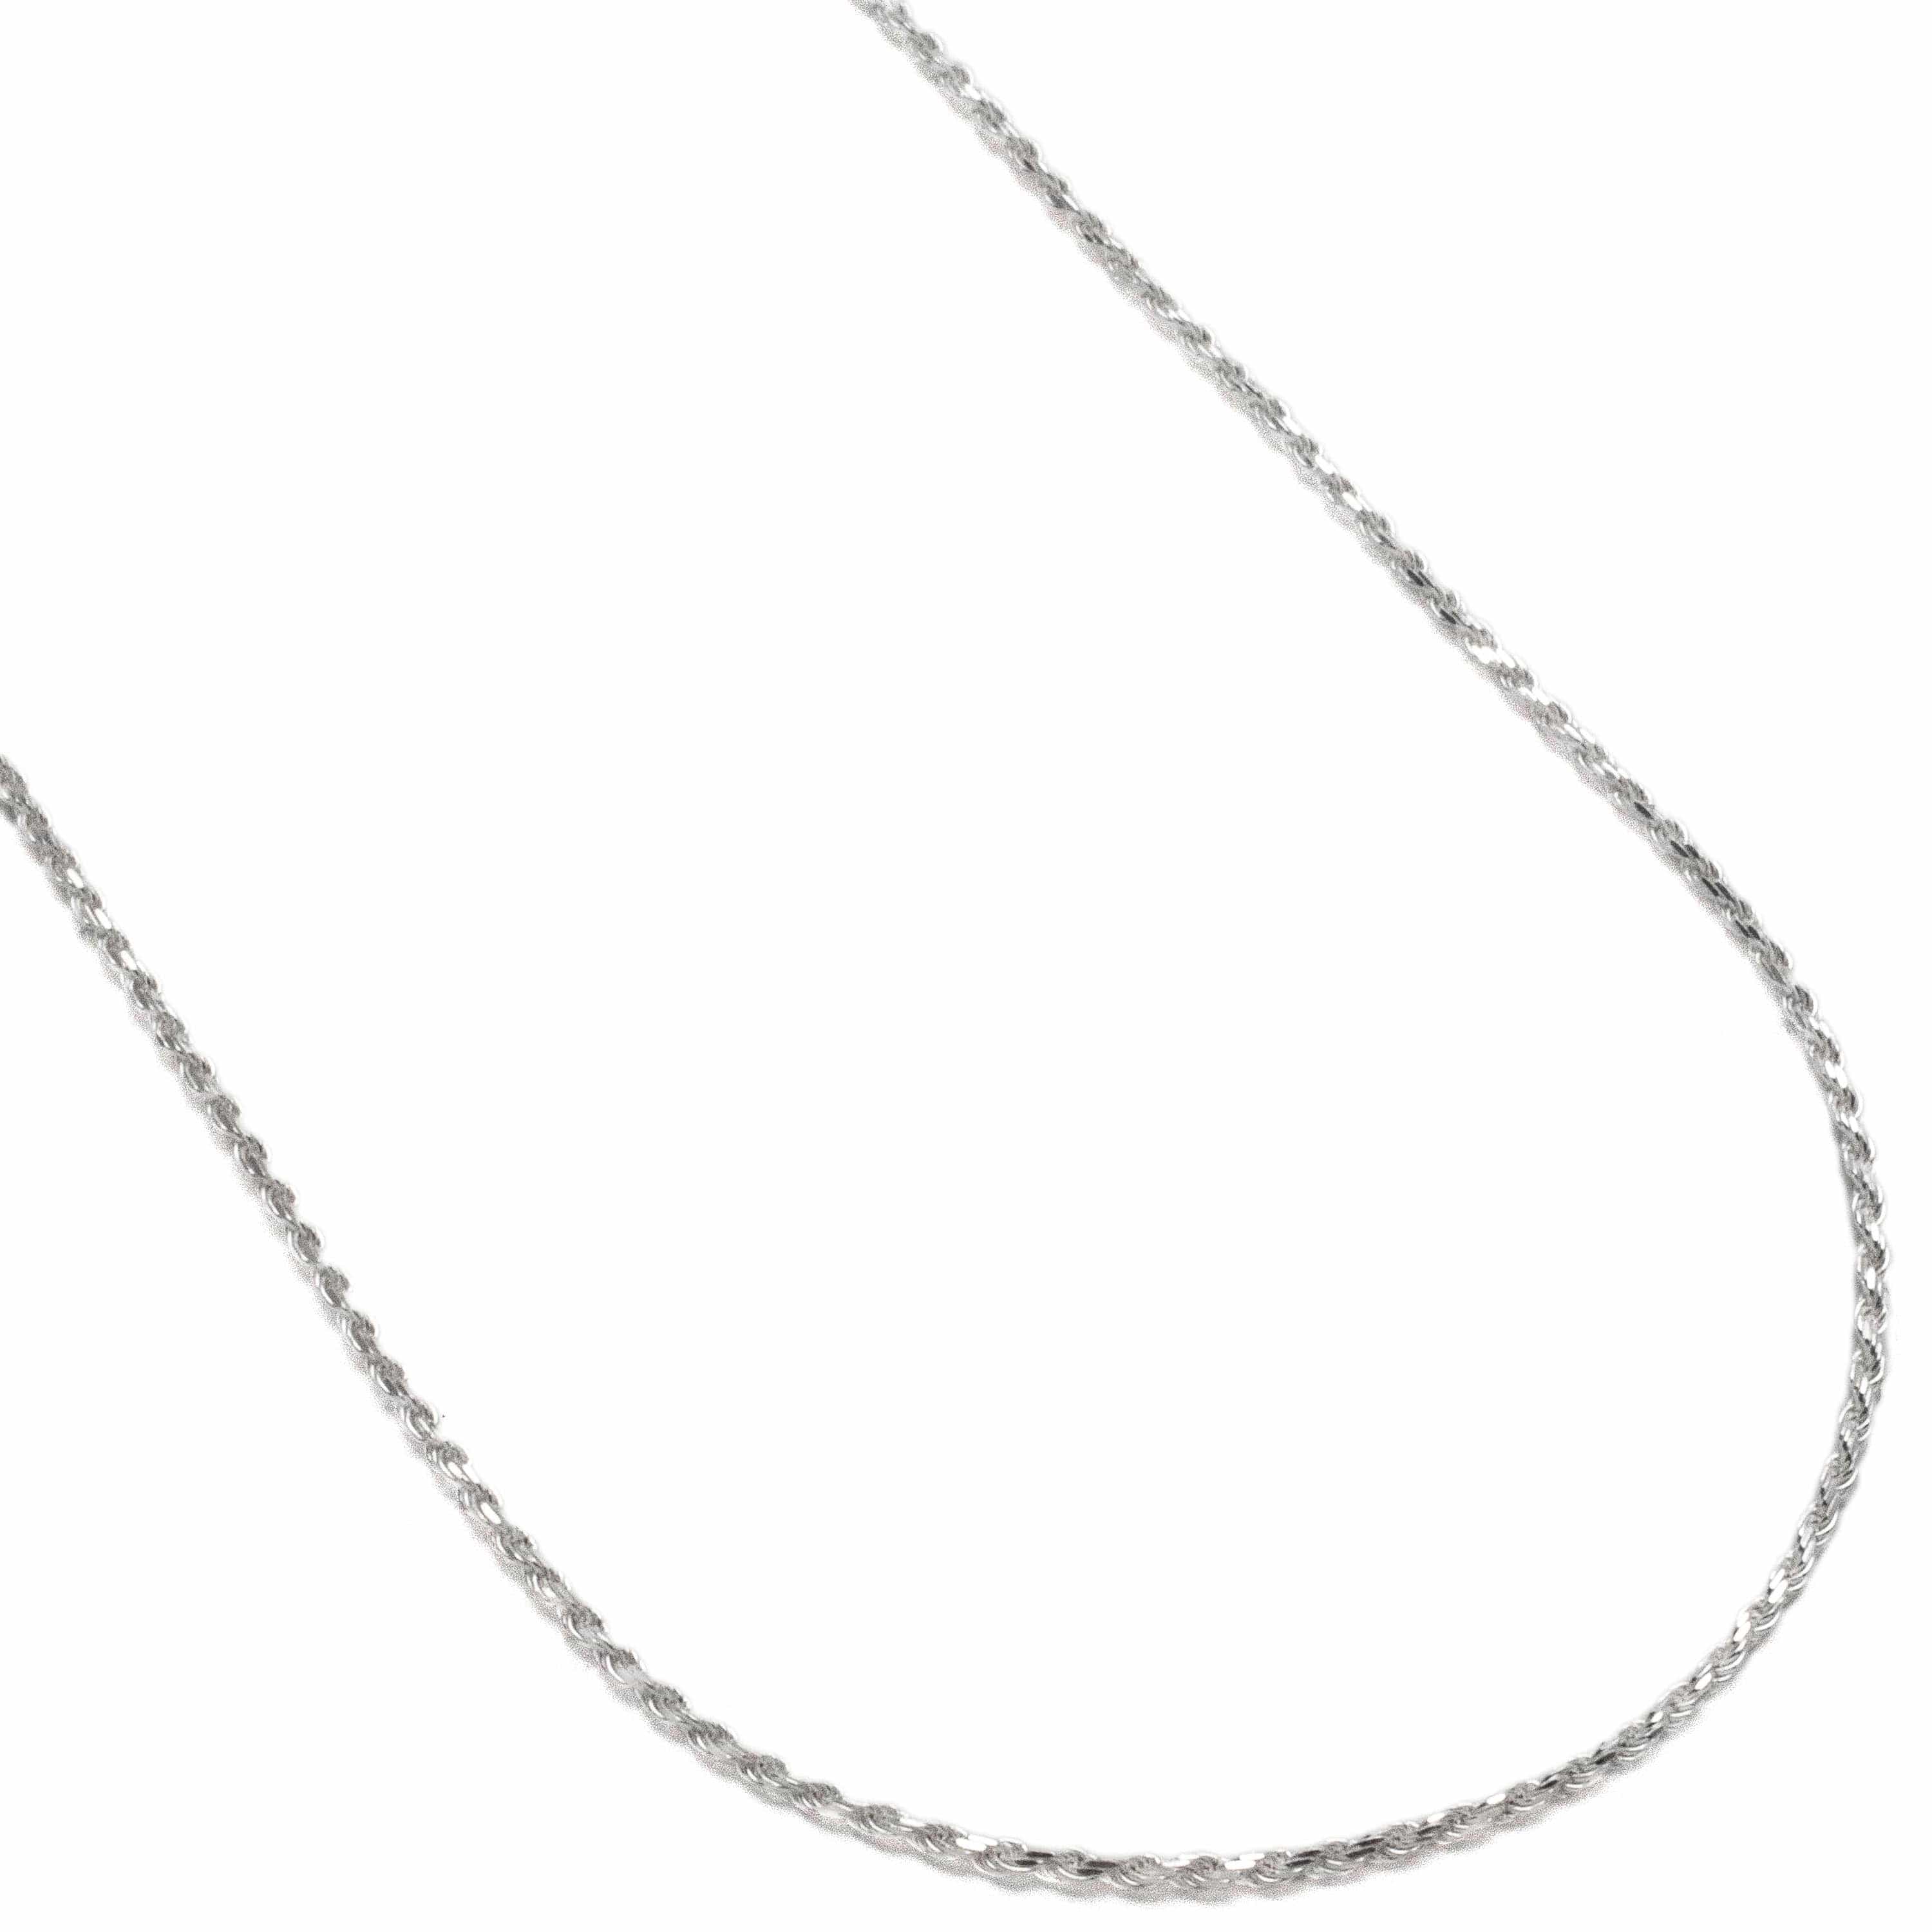 1mm sterling silver ball chain necklace 16 inch – Roberto Martinez.com